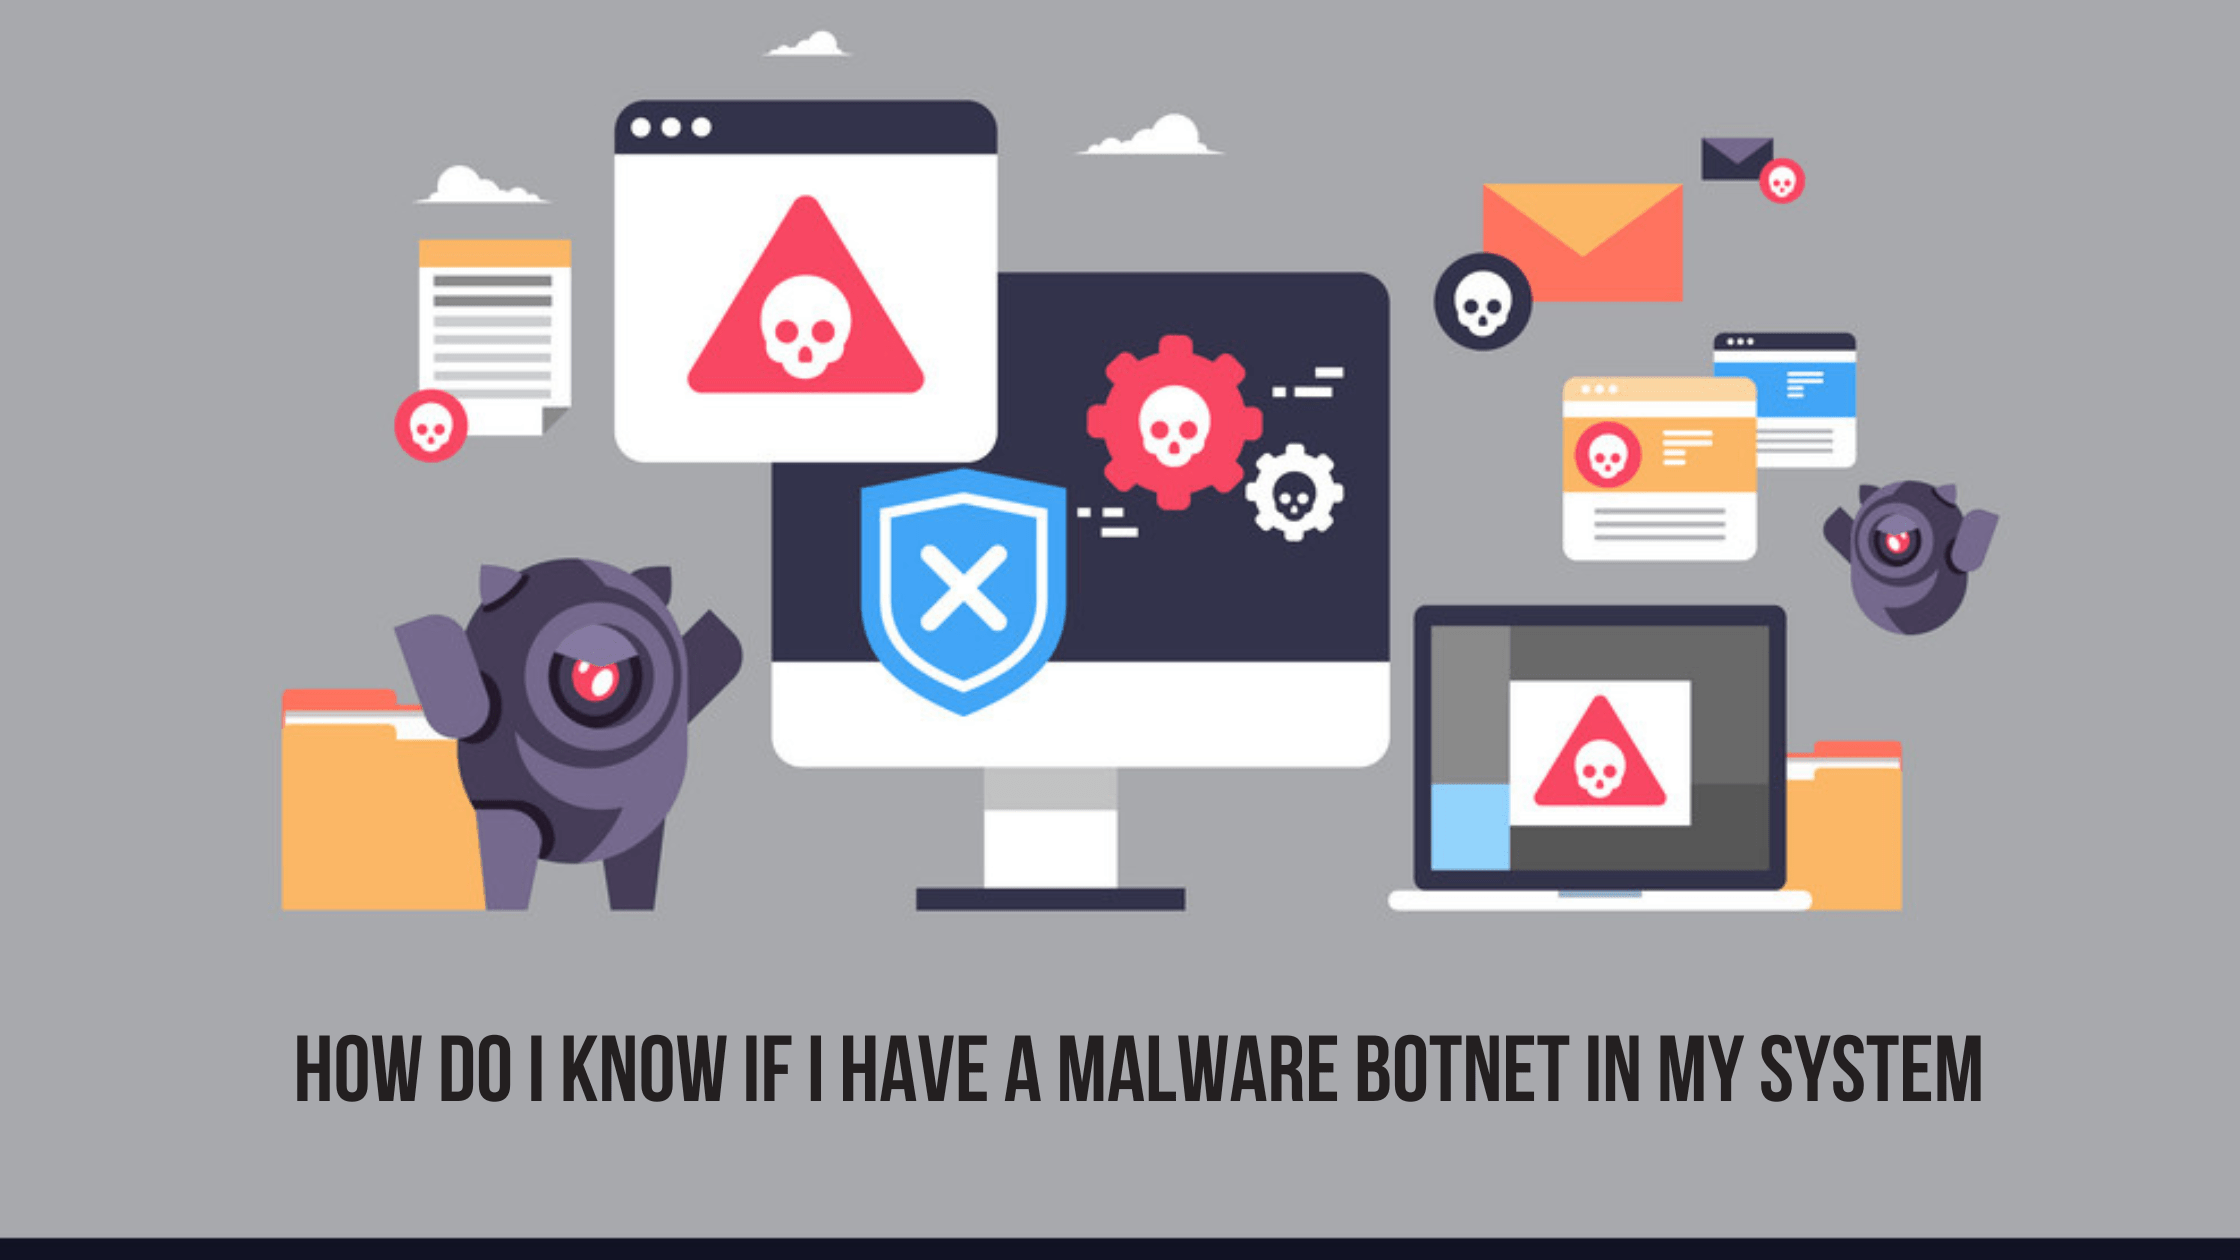 How do I know if I have a malware botnet in my system?